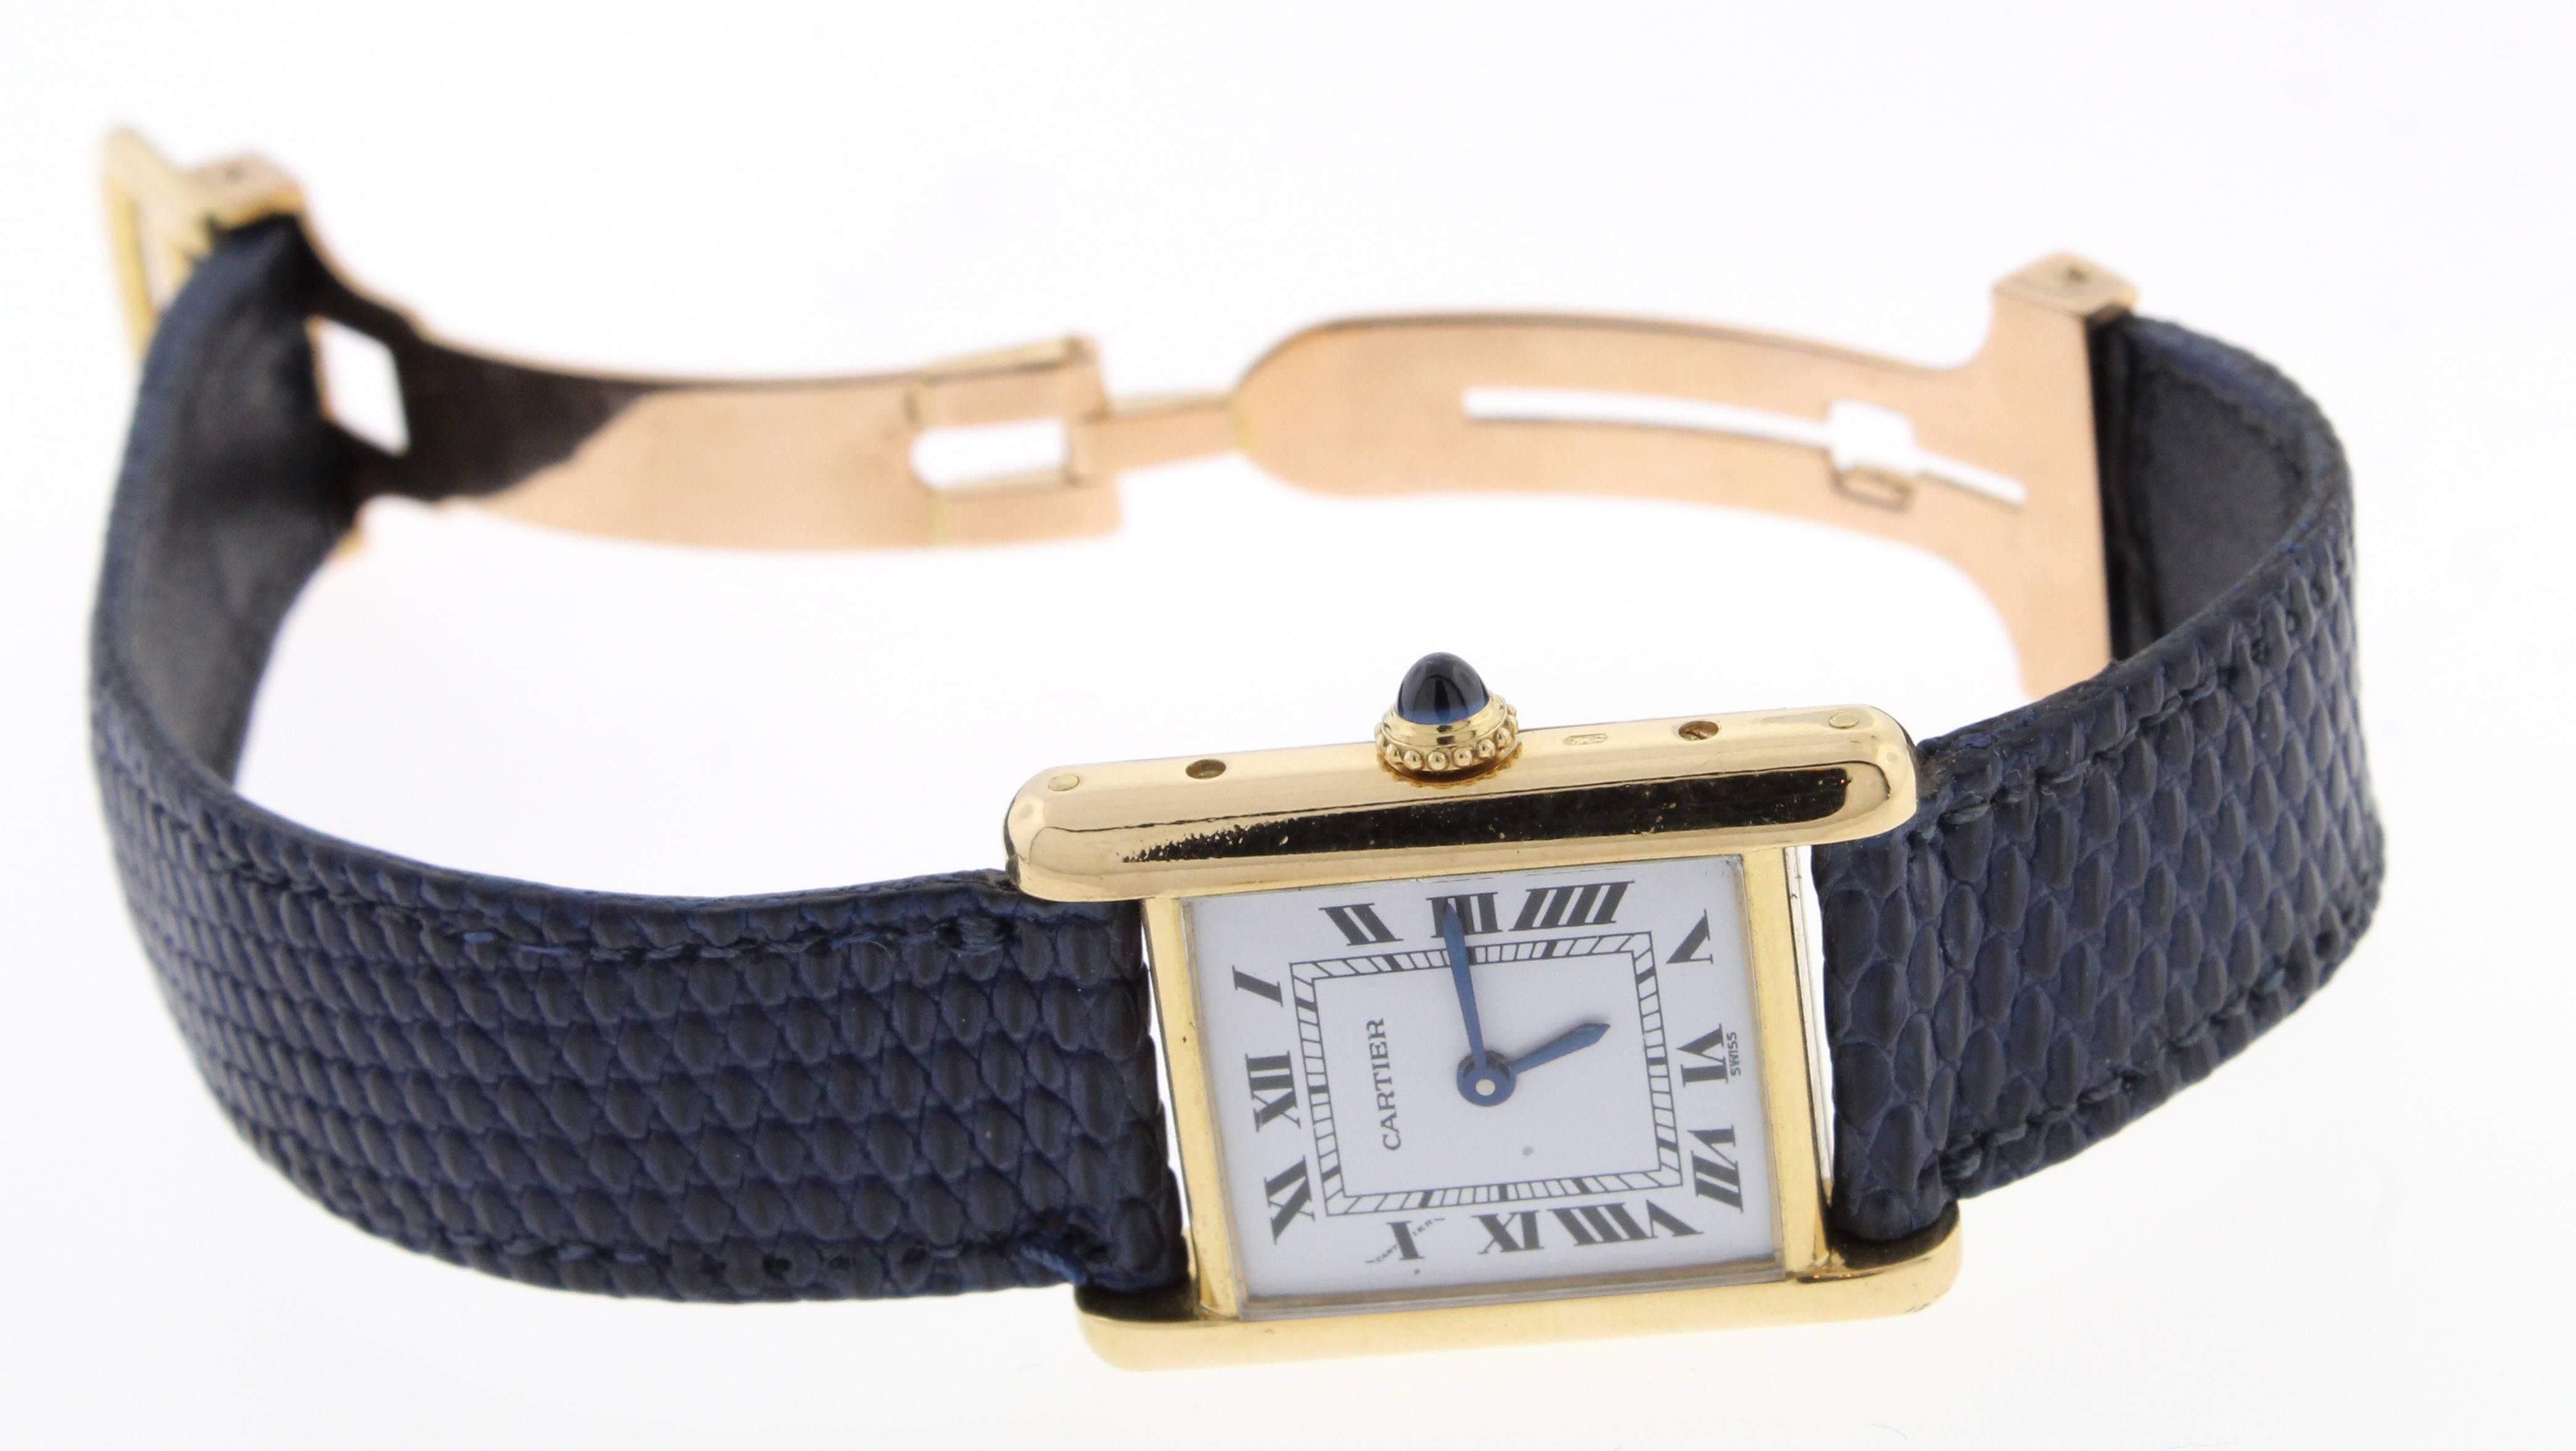  This Cartier Tank Louis 18 karat leather strap watch features a stylish tank case, classic white roman dial with blue steel hands.

Sapphire topped crown
Mechanical movement. 
29mm x 22mm case dimension
Crocodile Blue leather strap
Deployment